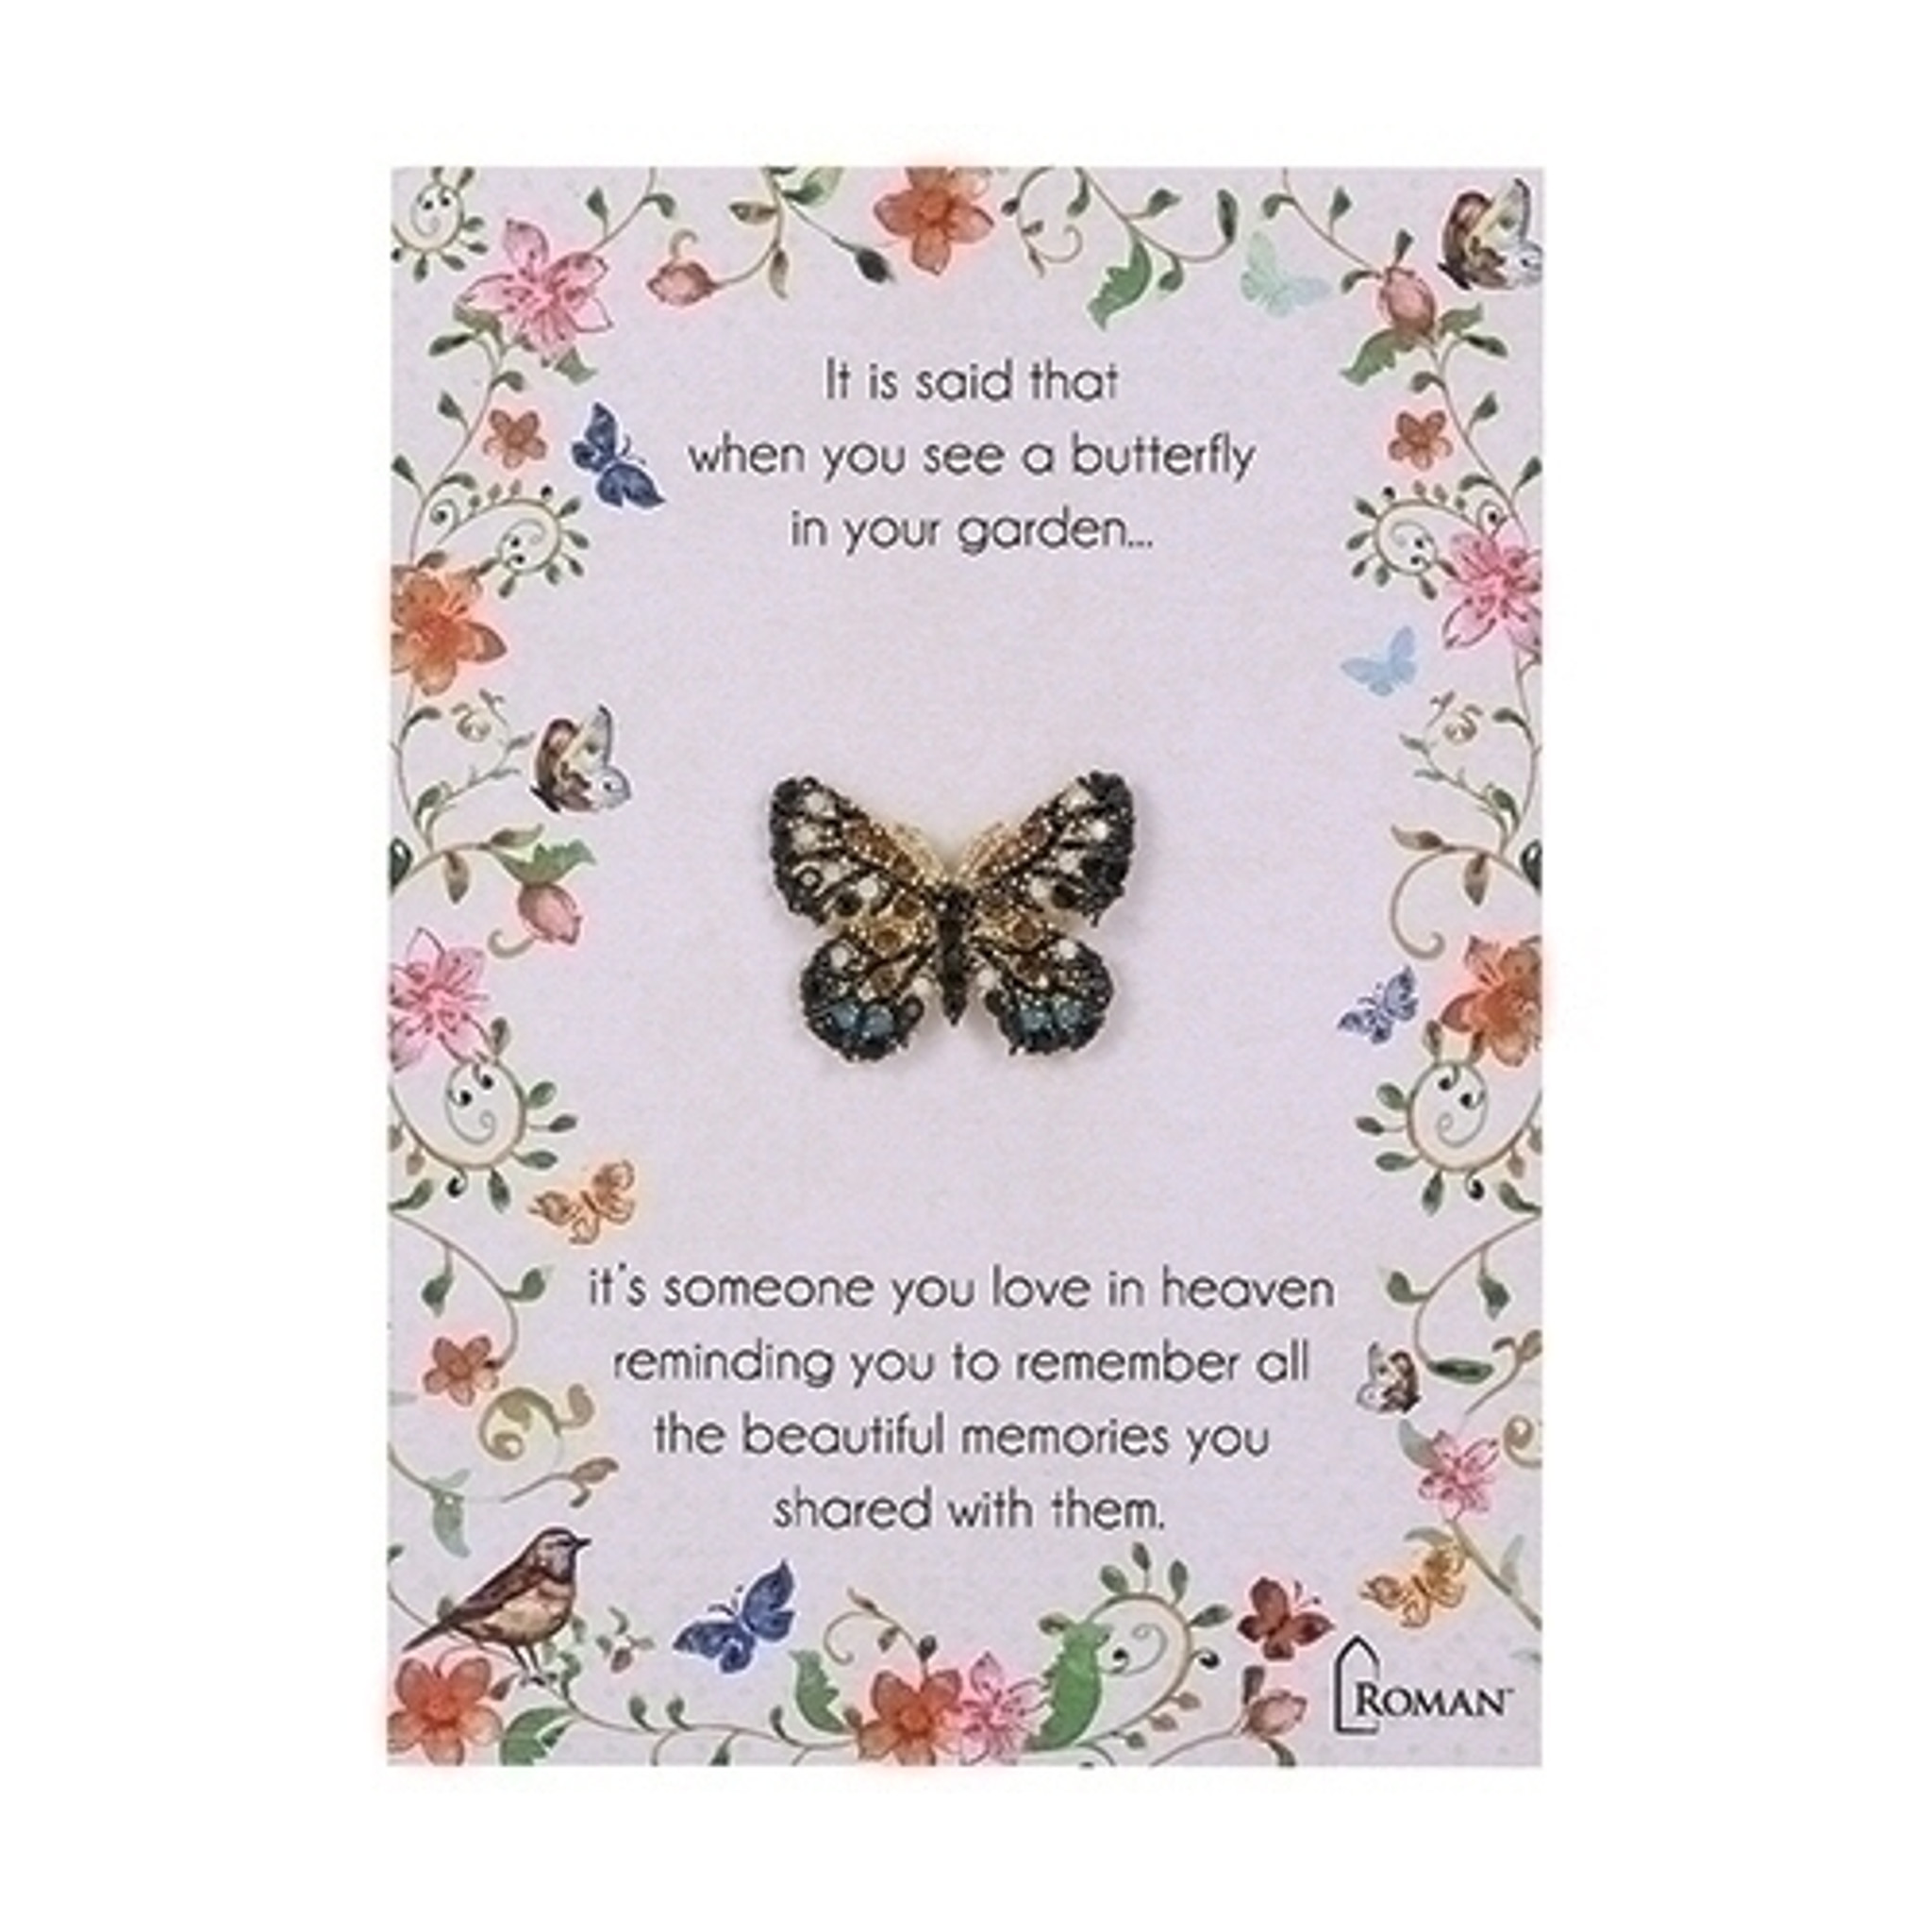 Bereavement Butterfly Pin - Giftswithlove,Inc.